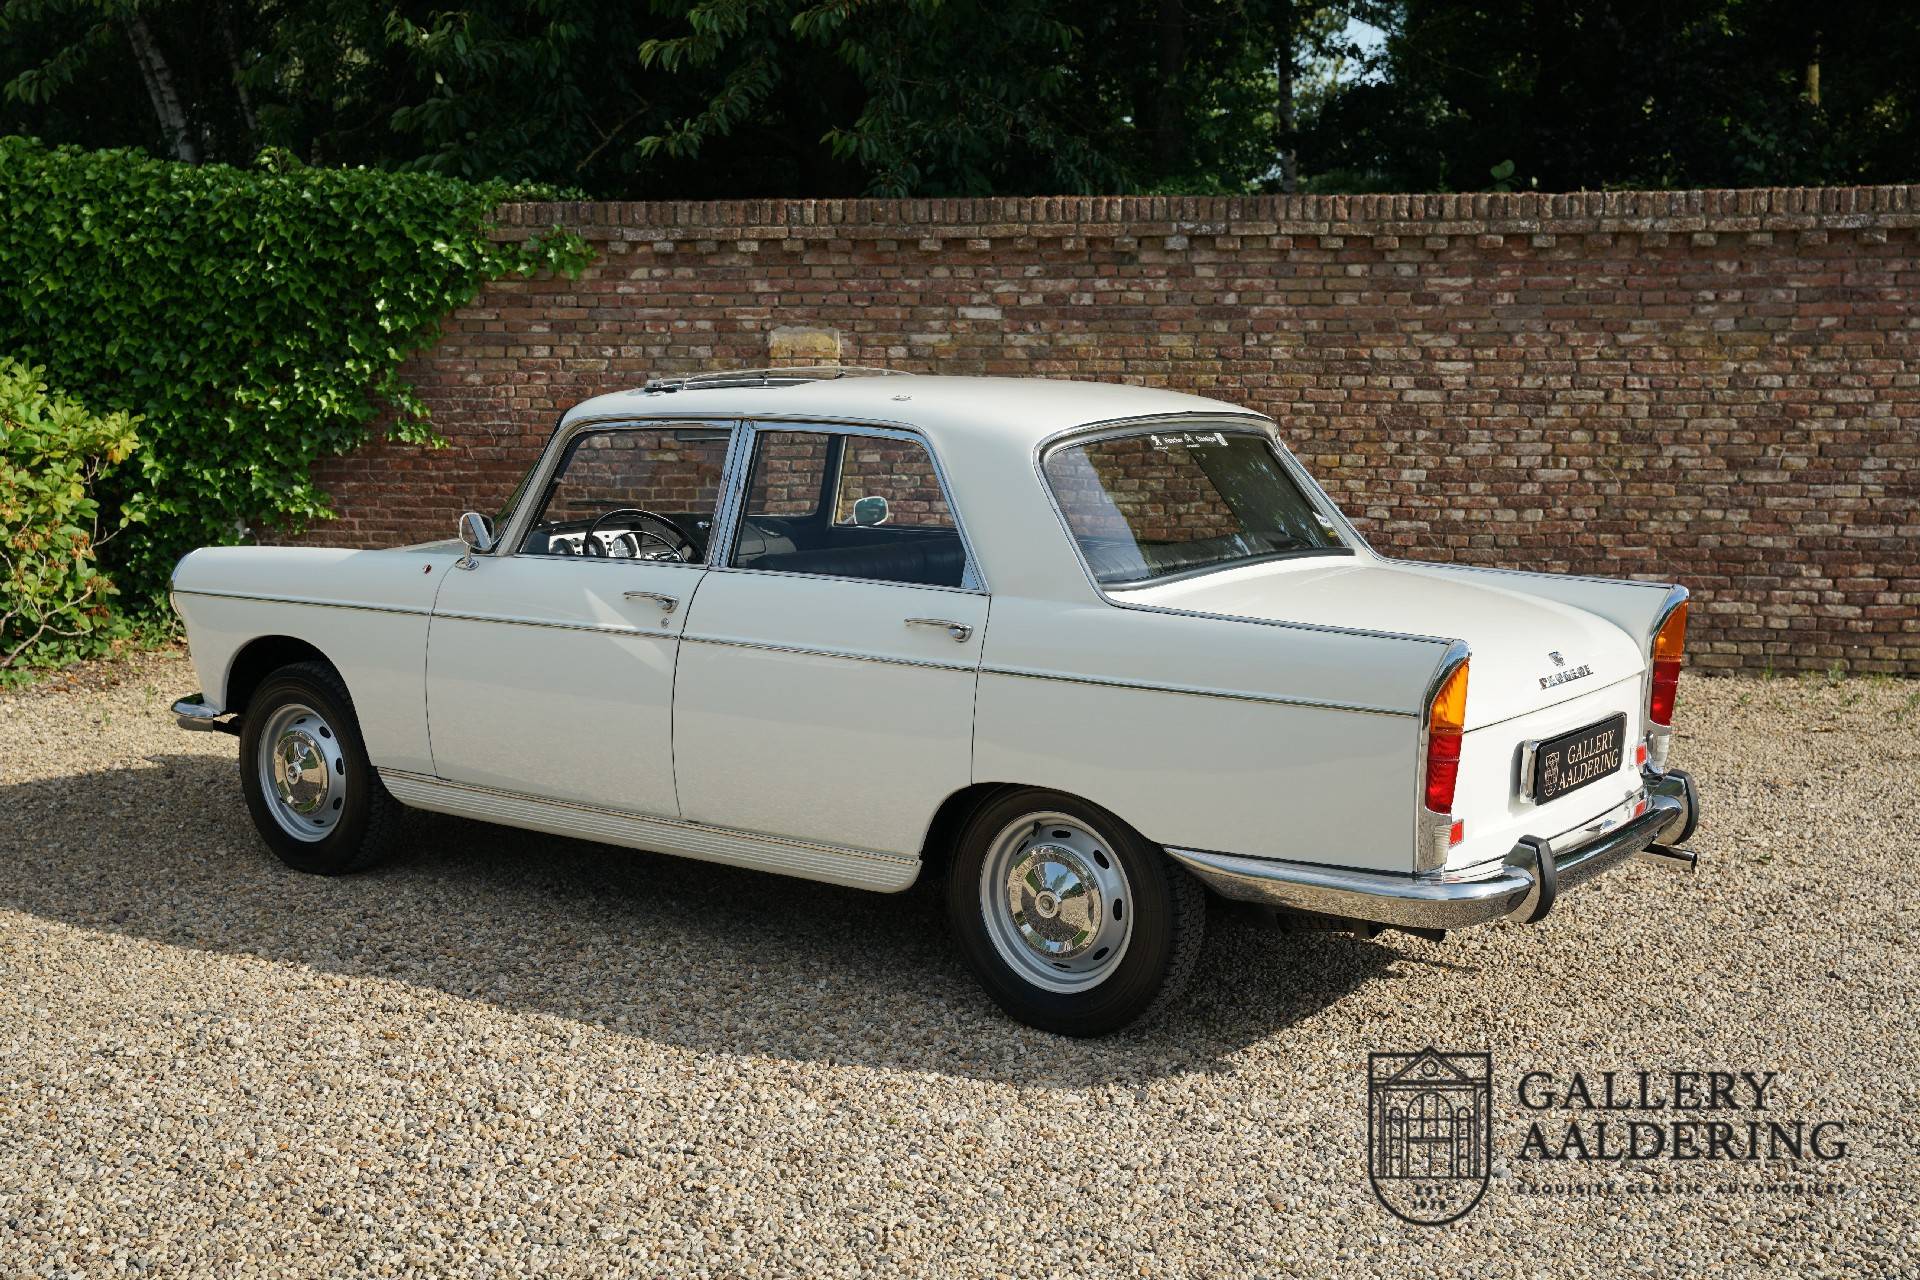 For Sale Peugeot 404 (1967) offered for GBP 17,315